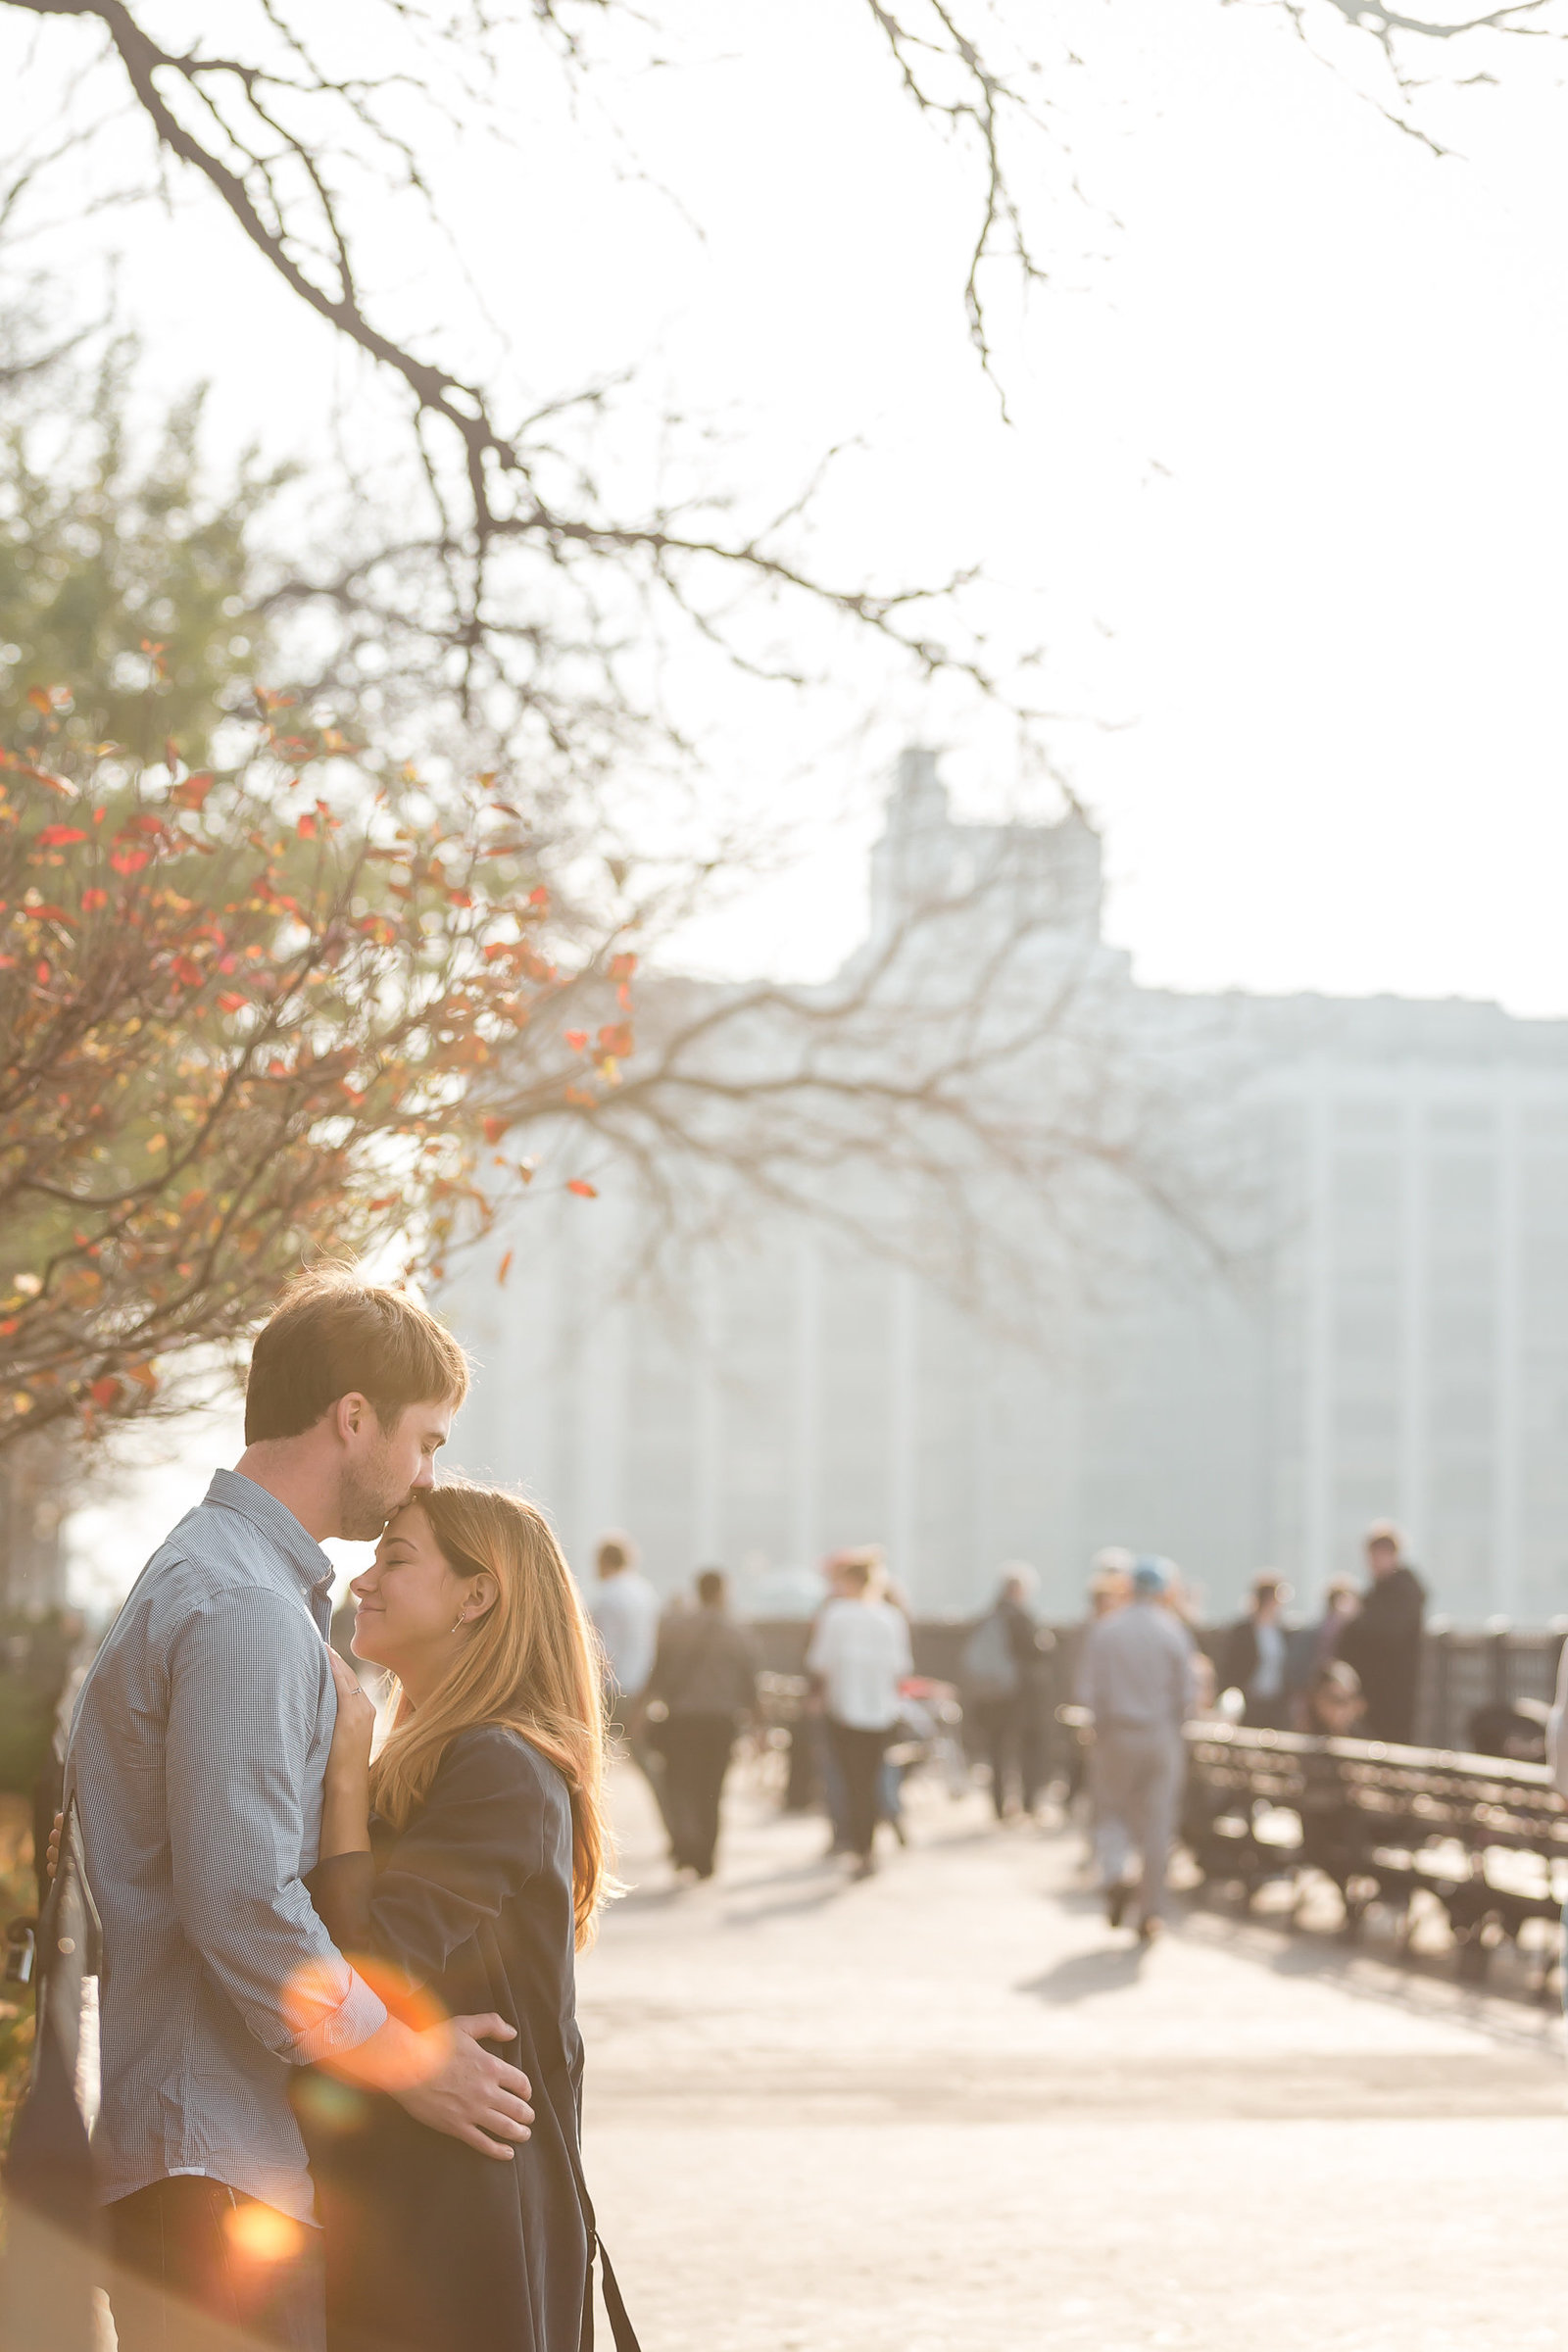 Golden Brooklyn Bridge Park engagement session in New York City by Jamerlyn Brown Photography